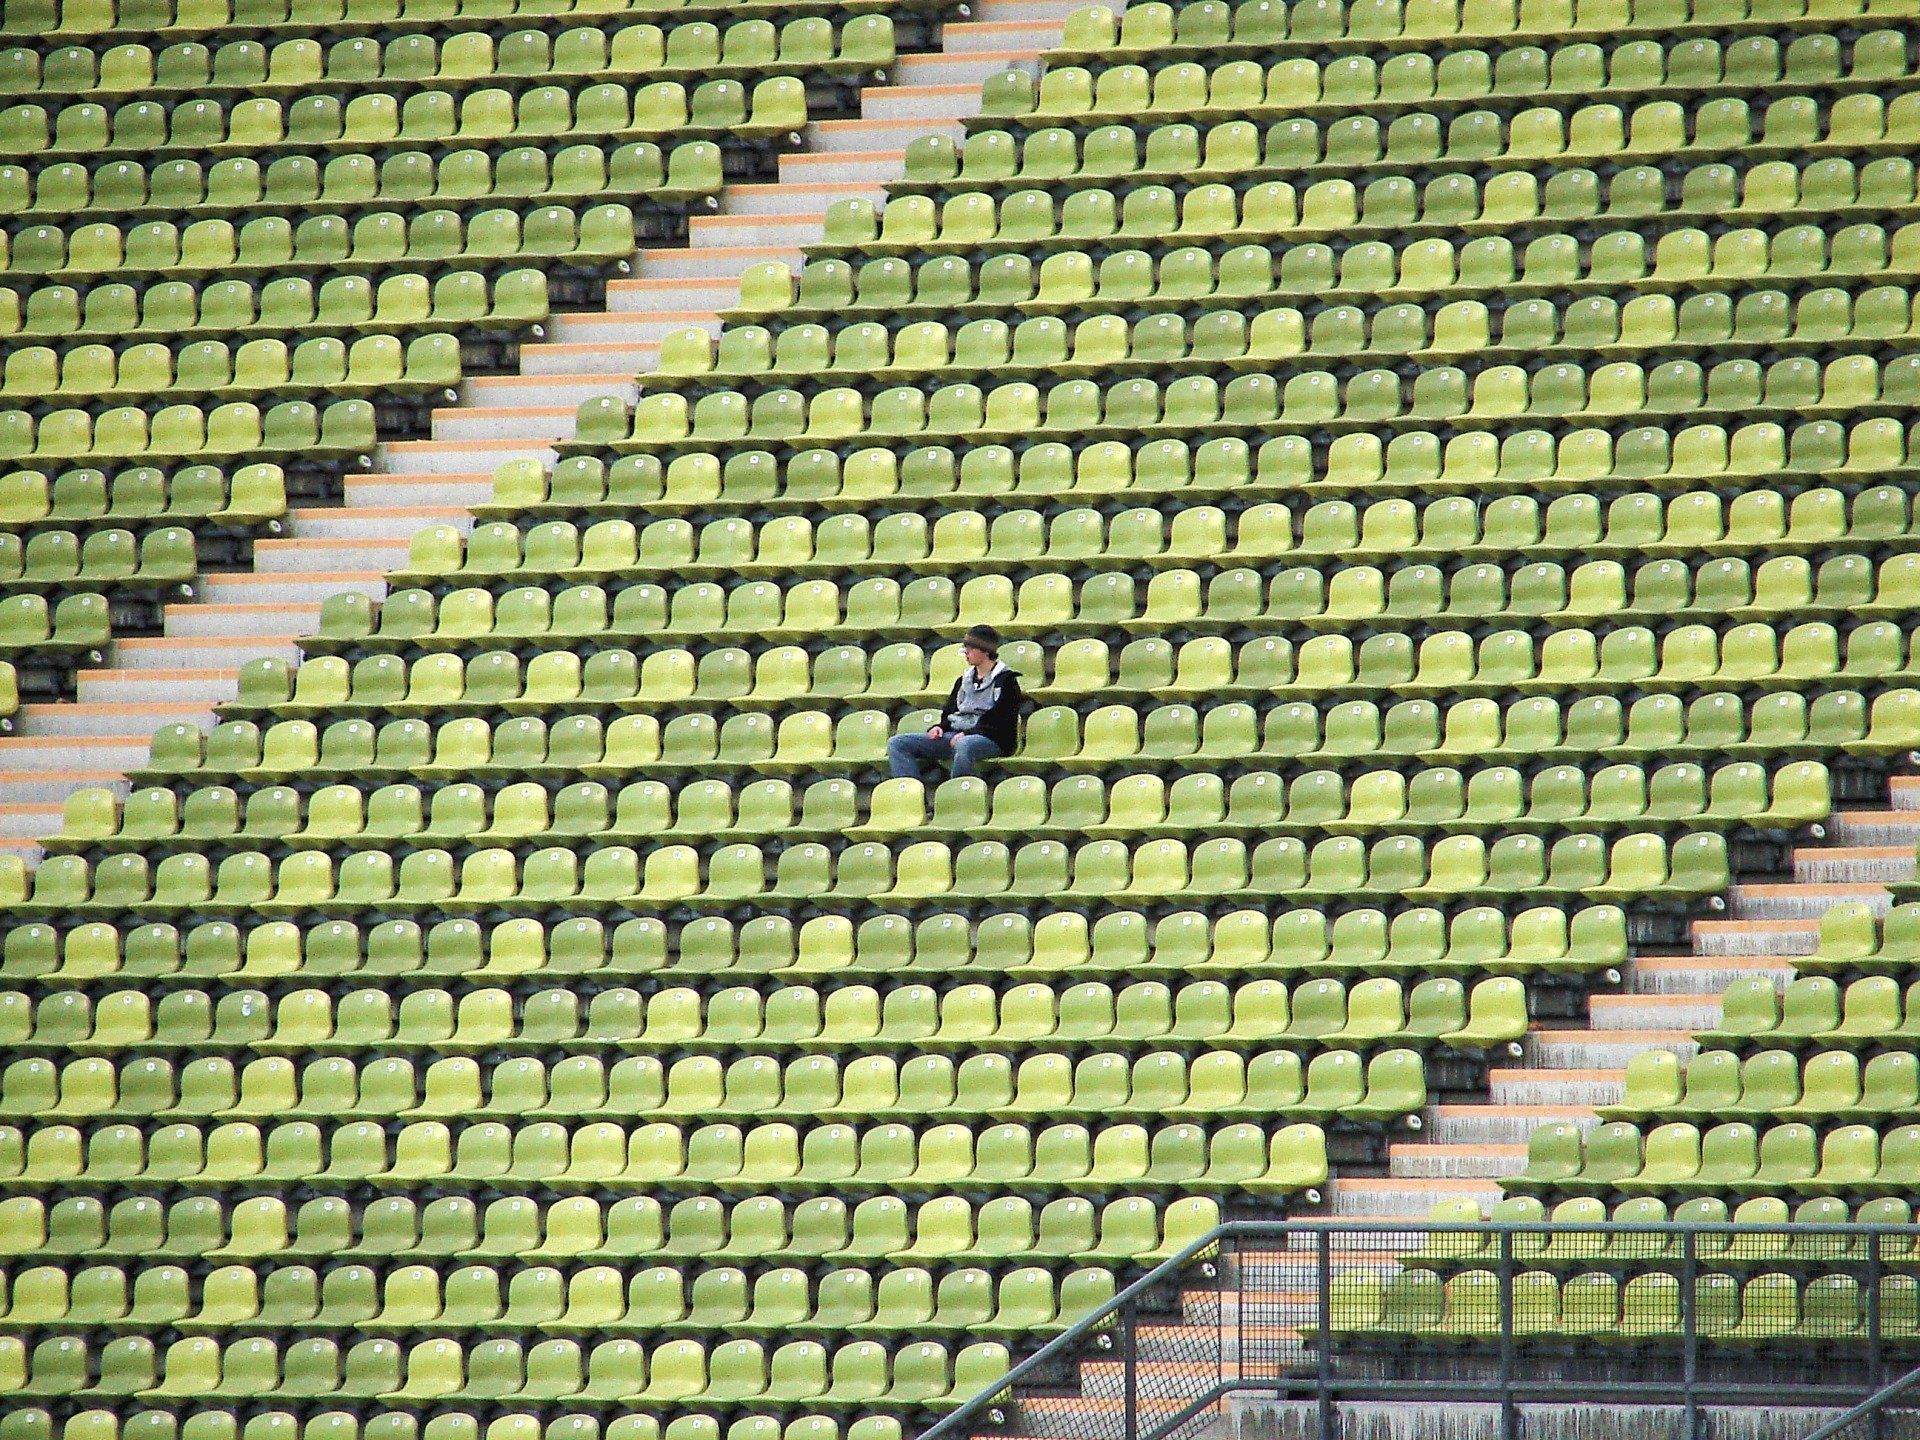 person in a chair in empty stadium